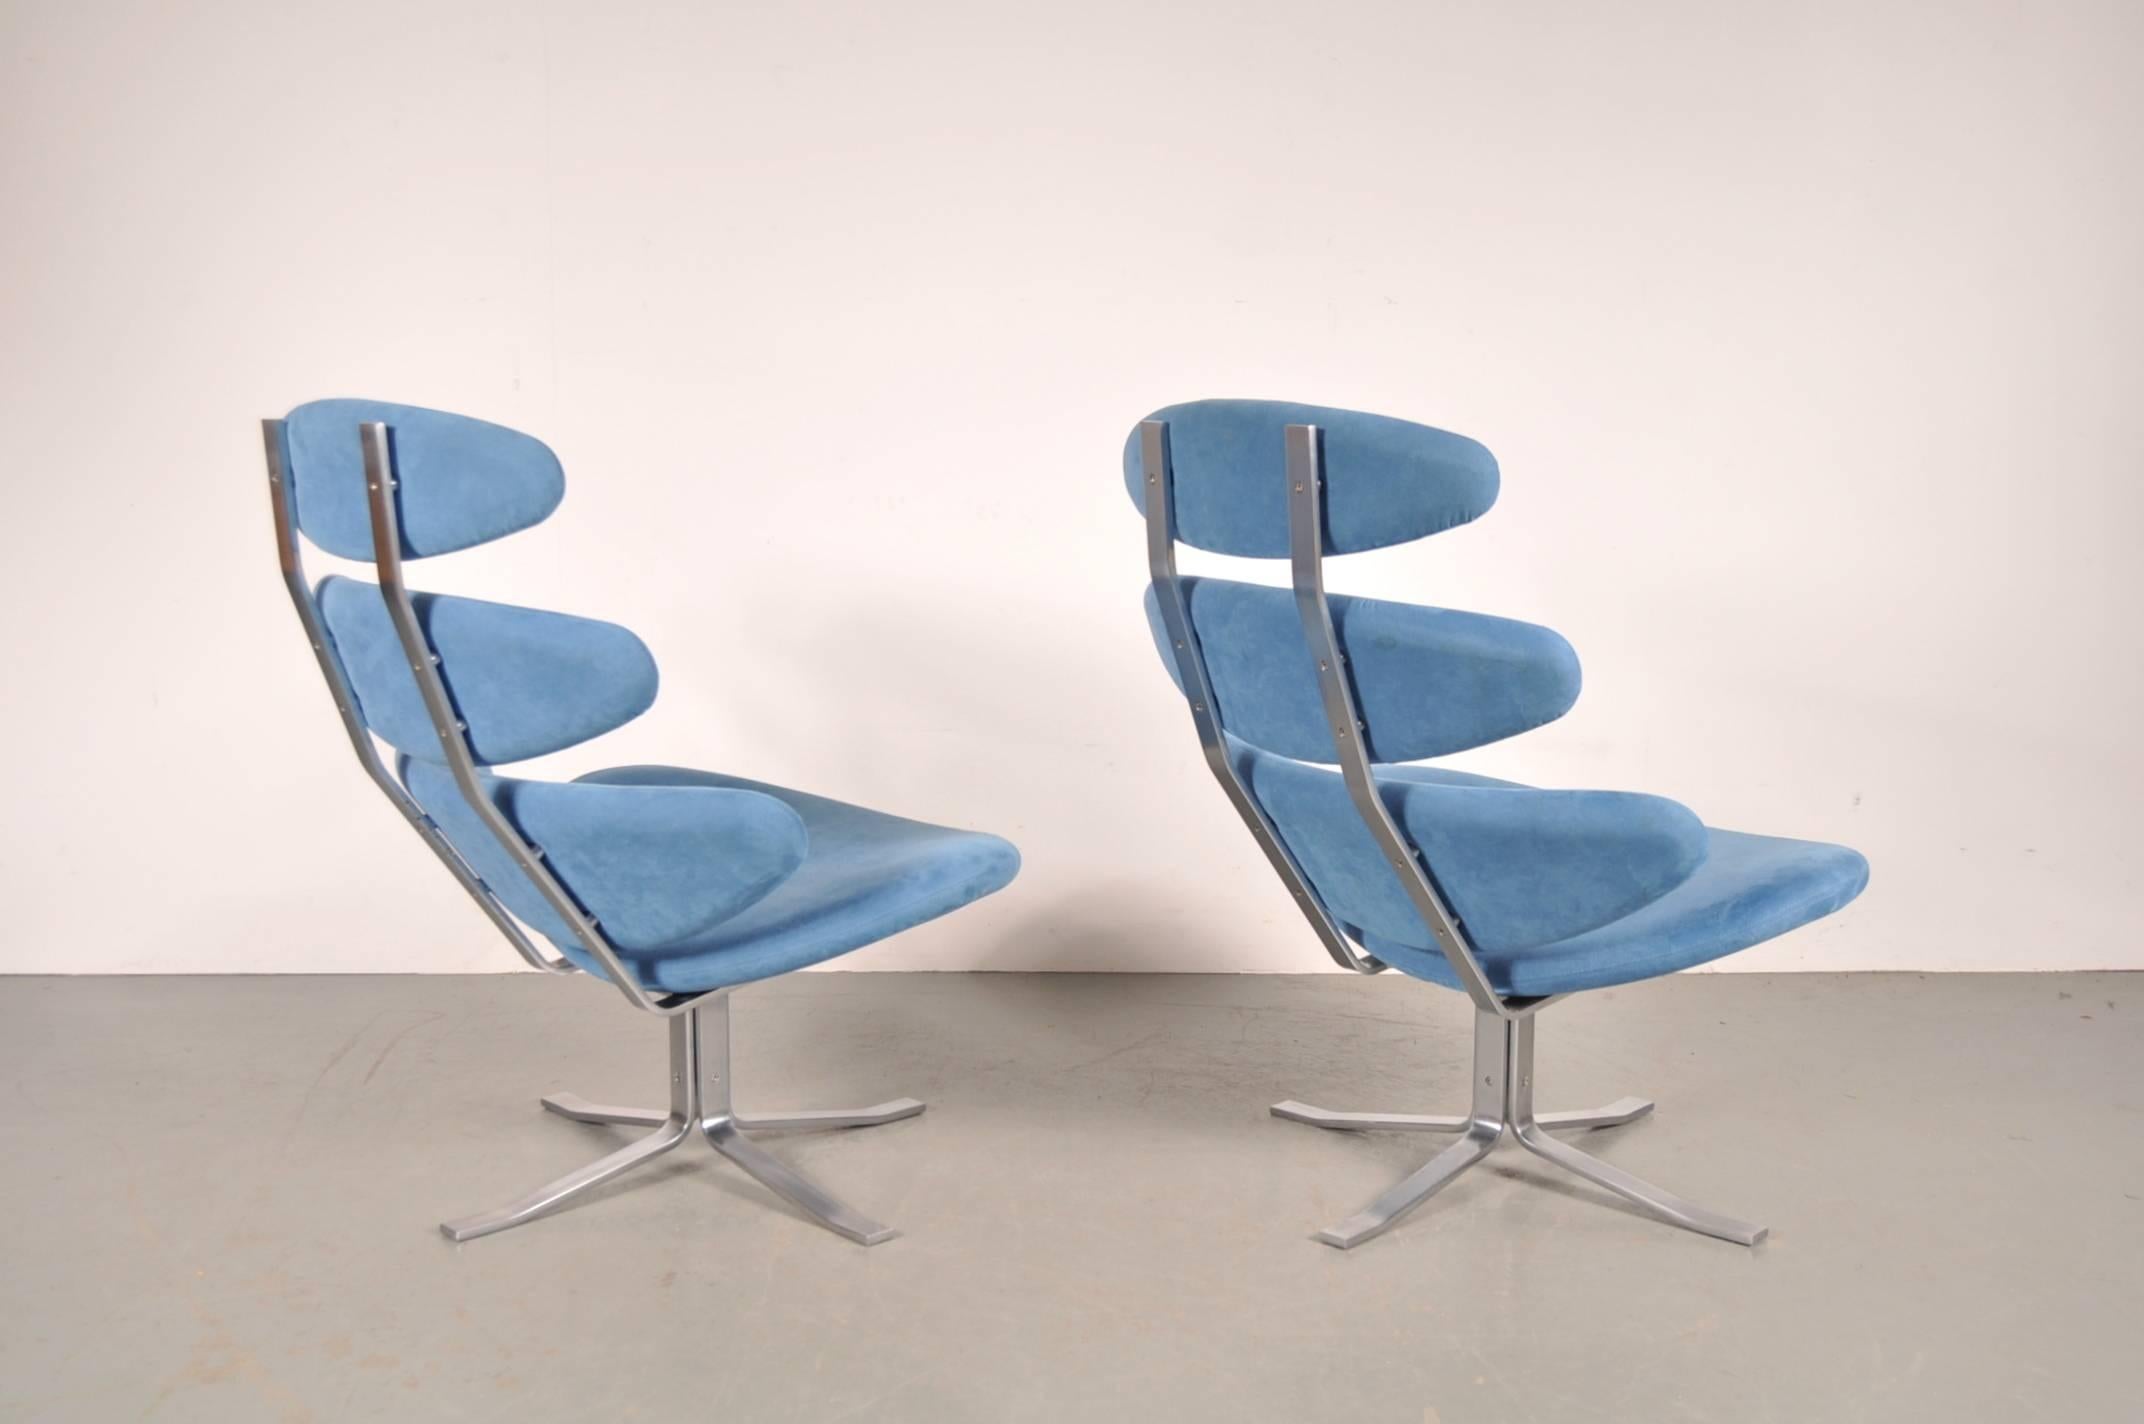 Mid-Century Modern Set of Two Corona Chairs by Poul Volther for Erik Jorgensen, Denmark, 1964